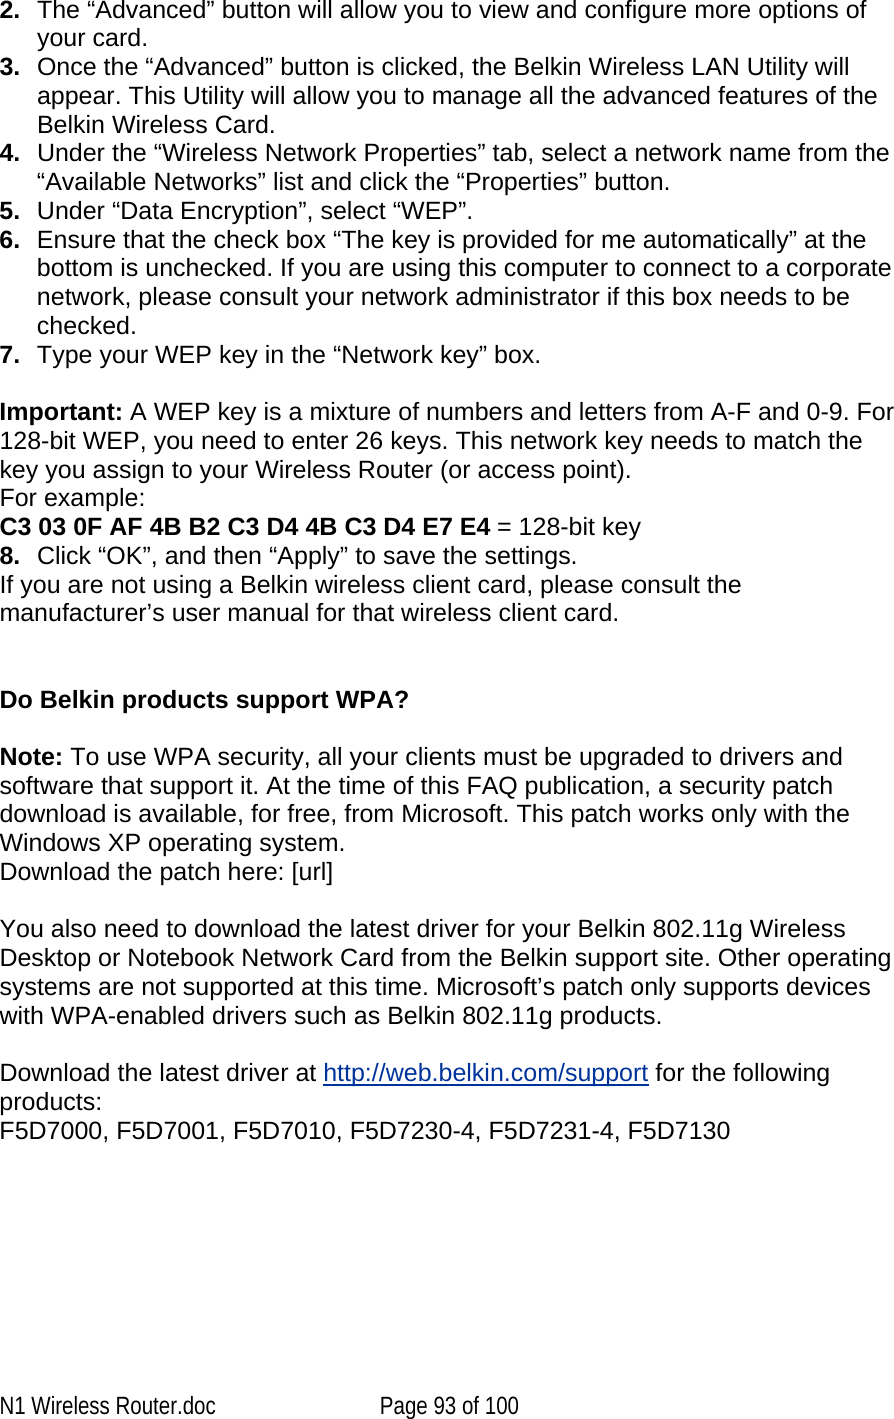   2.  The “Advanced” button will allow you to view and configure more options of your card. 3.  Once the “Advanced” button is clicked, the Belkin Wireless LAN Utility will appear. This Utility will allow you to manage all the advanced features of the Belkin Wireless Card. 4.  Under the “Wireless Network Properties” tab, select a network name from the “Available Networks” list and click the “Properties” button. 5.  Under “Data Encryption”, select “WEP”. 6.  Ensure that the check box “The key is provided for me automatically” at the bottom is unchecked. If you are using this computer to connect to a corporate network, please consult your network administrator if this box needs to be checked. 7.  Type your WEP key in the “Network key” box.  Important: A WEP key is a mixture of numbers and letters from A-F and 0-9. For 128-bit WEP, you need to enter 26 keys. This network key needs to match the key you assign to your Wireless Router (or access point).  For example:  C3 03 0F AF 4B B2 C3 D4 4B C3 D4 E7 E4 = 128-bit key 8.  Click “OK”, and then “Apply” to save the settings. If you are not using a Belkin wireless client card, please consult the manufacturer’s user manual for that wireless client card.   Do Belkin products support WPA?  Note: To use WPA security, all your clients must be upgraded to drivers and software that support it. At the time of this FAQ publication, a security patch download is available, for free, from Microsoft. This patch works only with the Windows XP operating system.  Download the patch here: [url]  You also need to download the latest driver for your Belkin 802.11g Wireless Desktop or Notebook Network Card from the Belkin support site. Other operating systems are not supported at this time. Microsoft’s patch only supports devices with WPA-enabled drivers such as Belkin 802.11g products.  Download the latest driver at http://web.belkin.com/support for the following products: F5D7000, F5D7001, F5D7010, F5D7230-4, F5D7231-4, F5D7130  N1 Wireless Router.doc  Page 93 of 100 